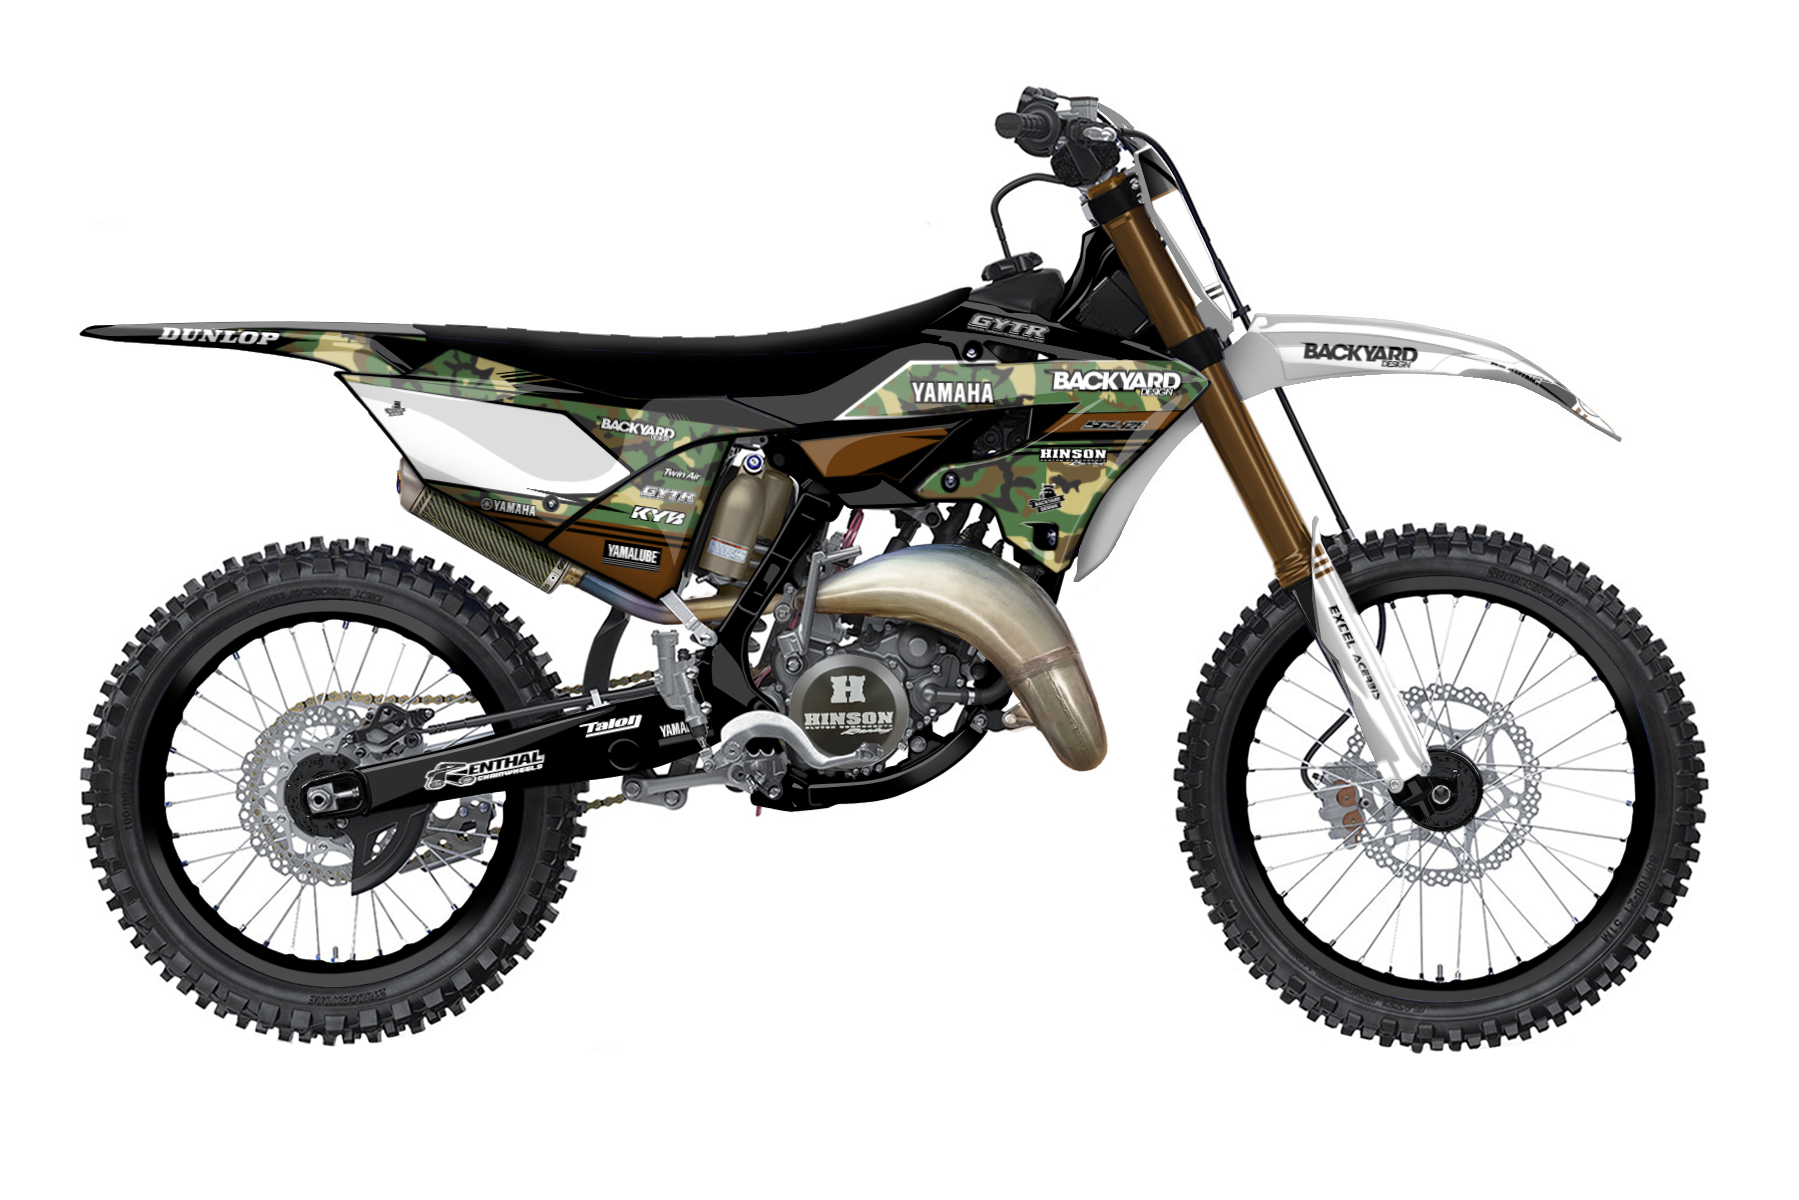 Yamaha YZ 125
MX Graphic Kits

The Yamaha YZ 125 can convince with enough power to bring this lightweight to life and leave behind the competition. If you seek an agile 125cc bike, this one is the perfect match.